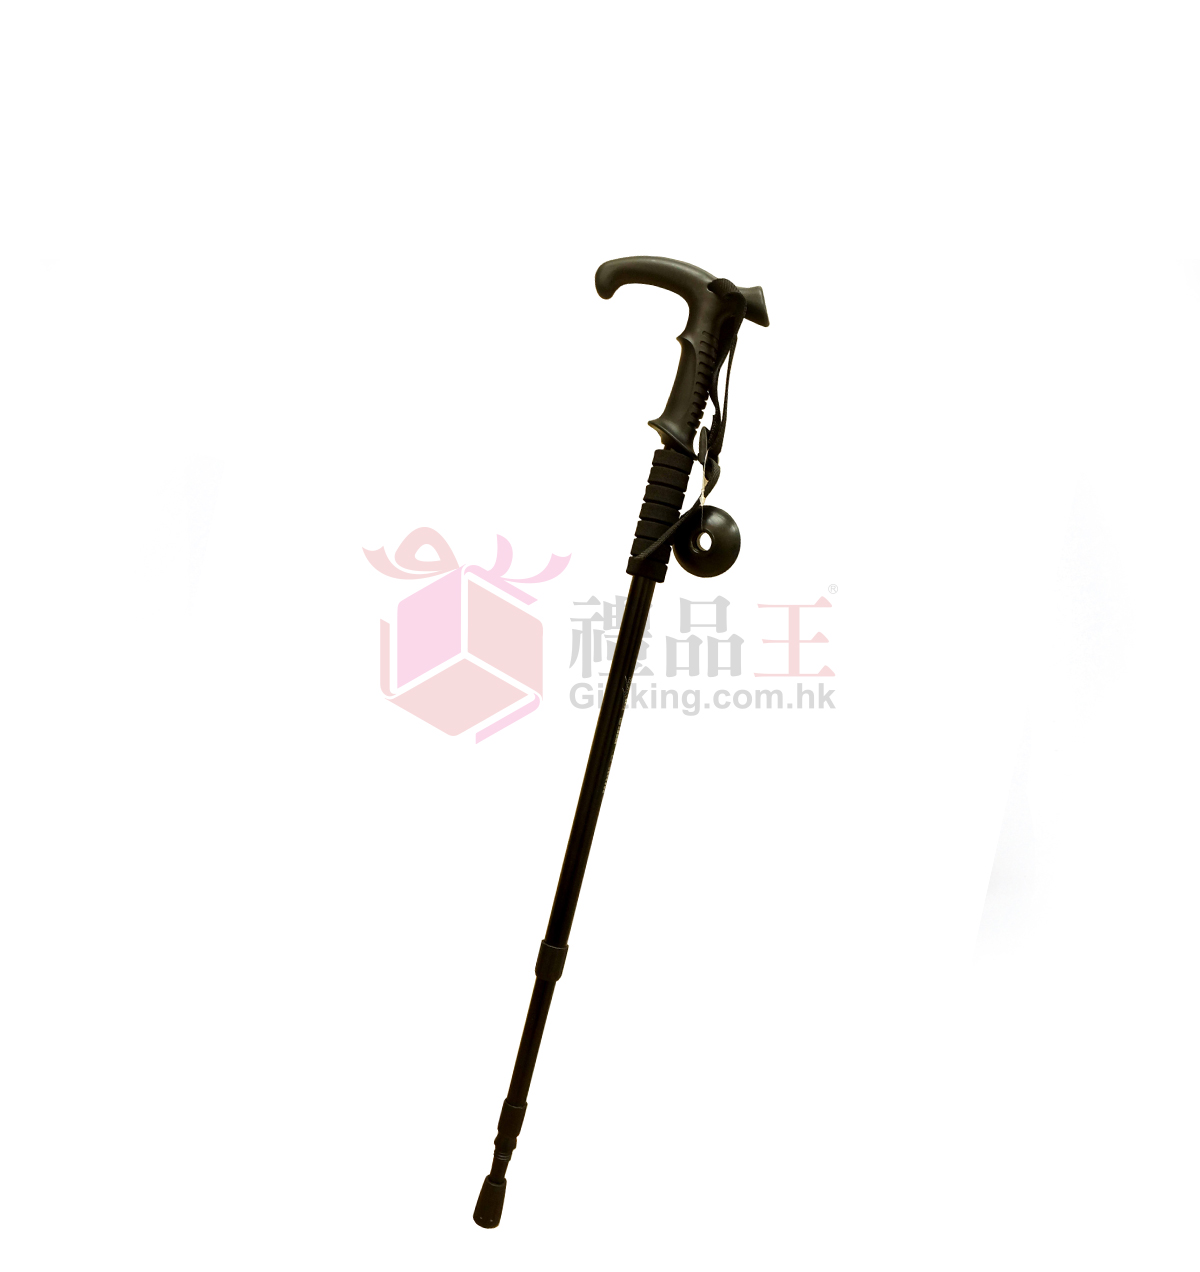 North District Community Key Project Telescopic stick (Travel gifts)